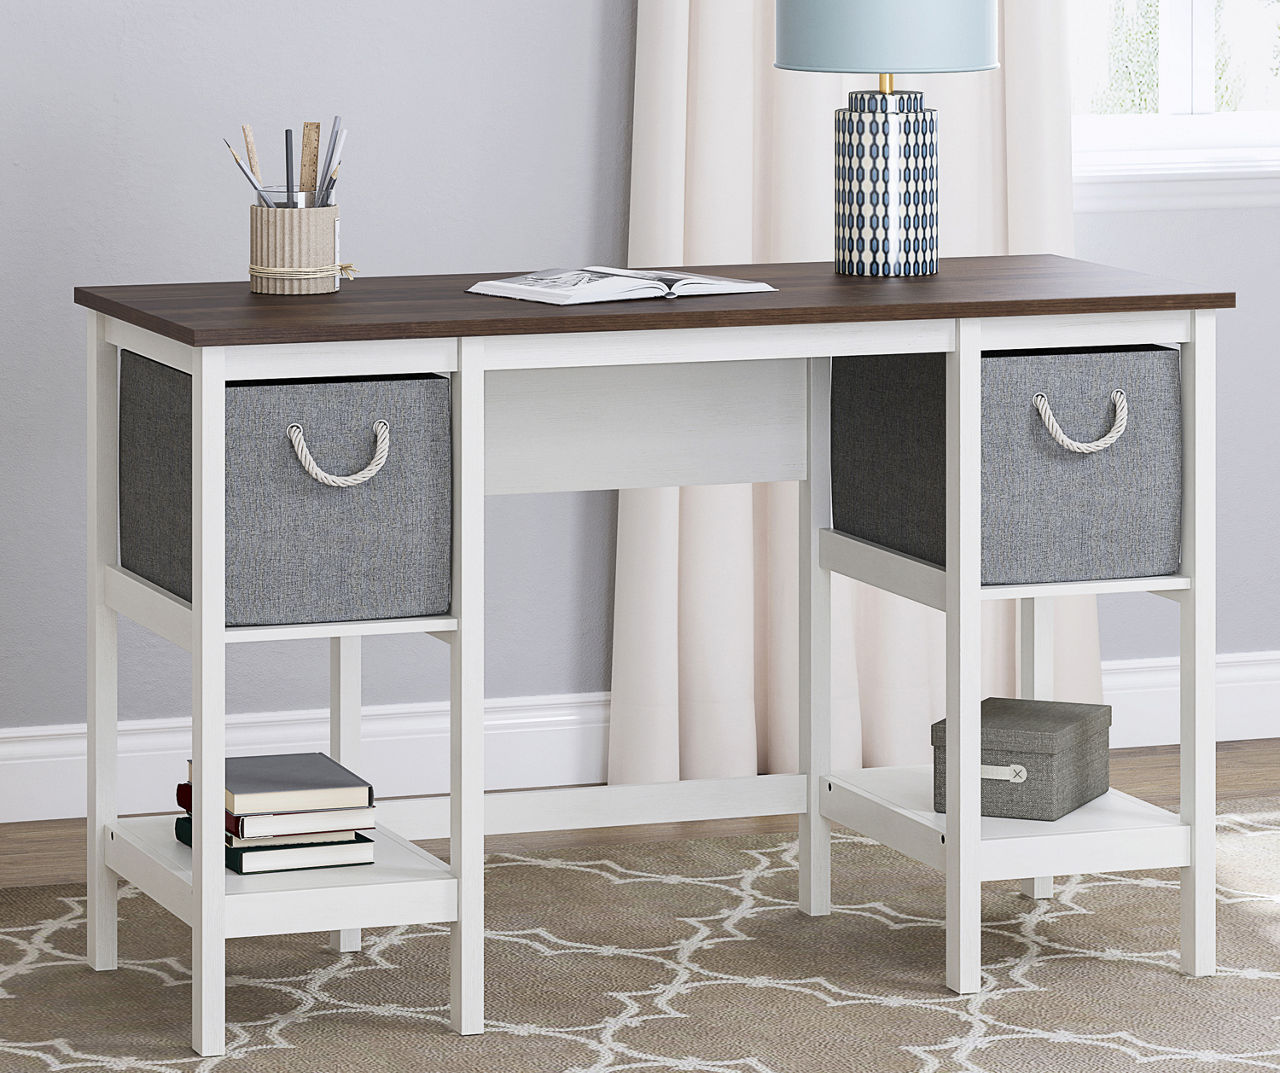 Real Living Desk with Fabric Drawers